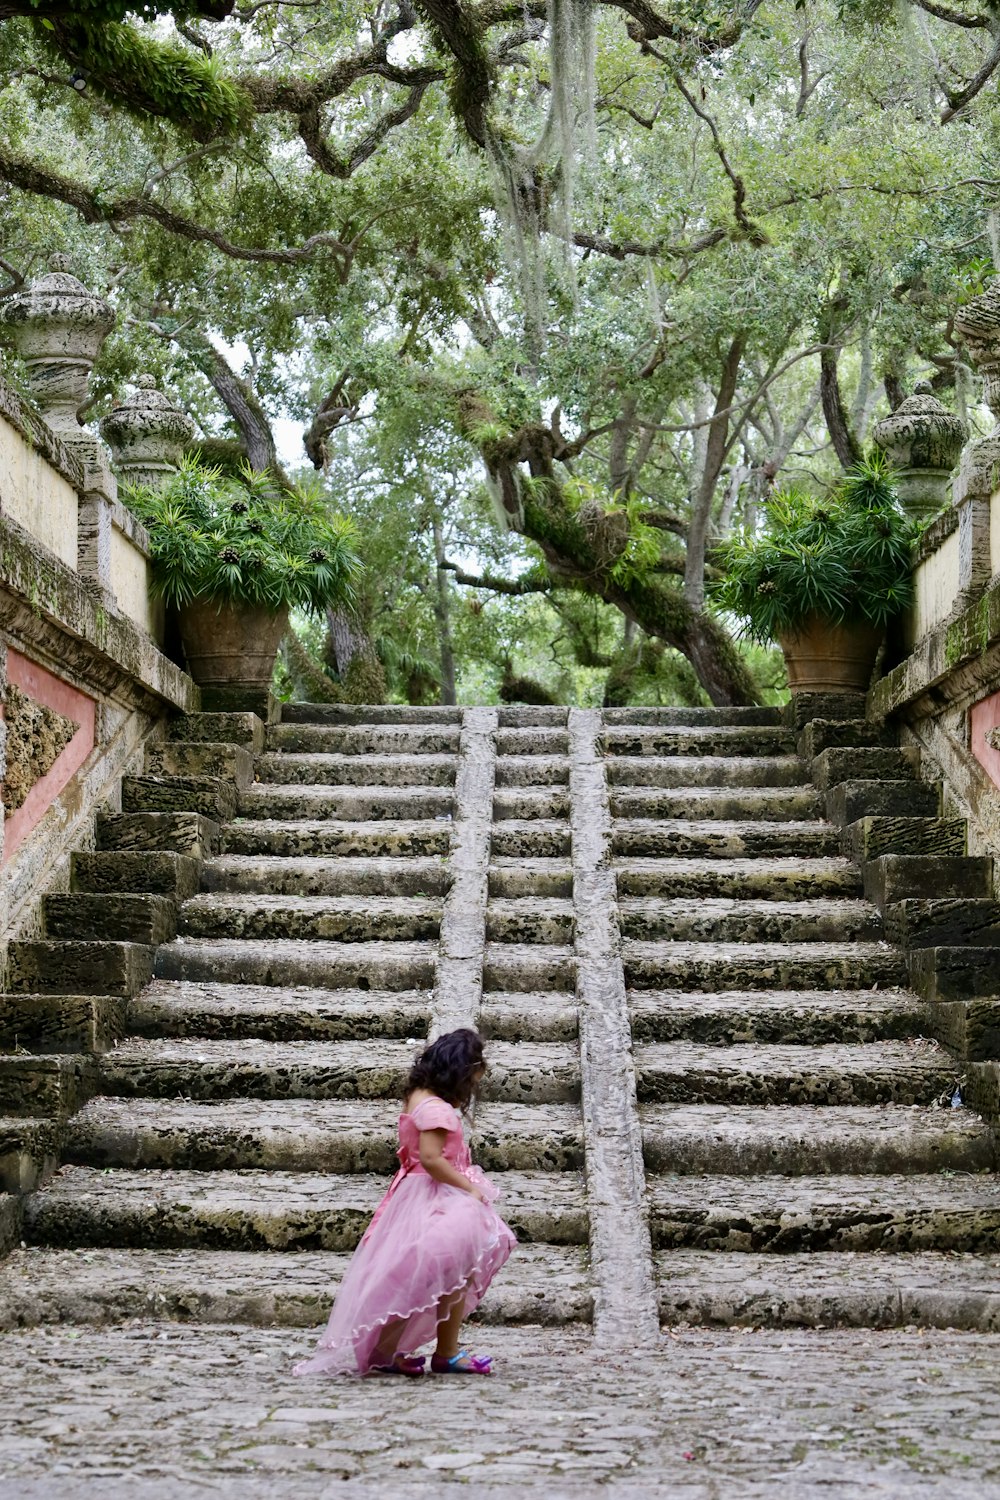 a young girl in a pink dress sitting on steps